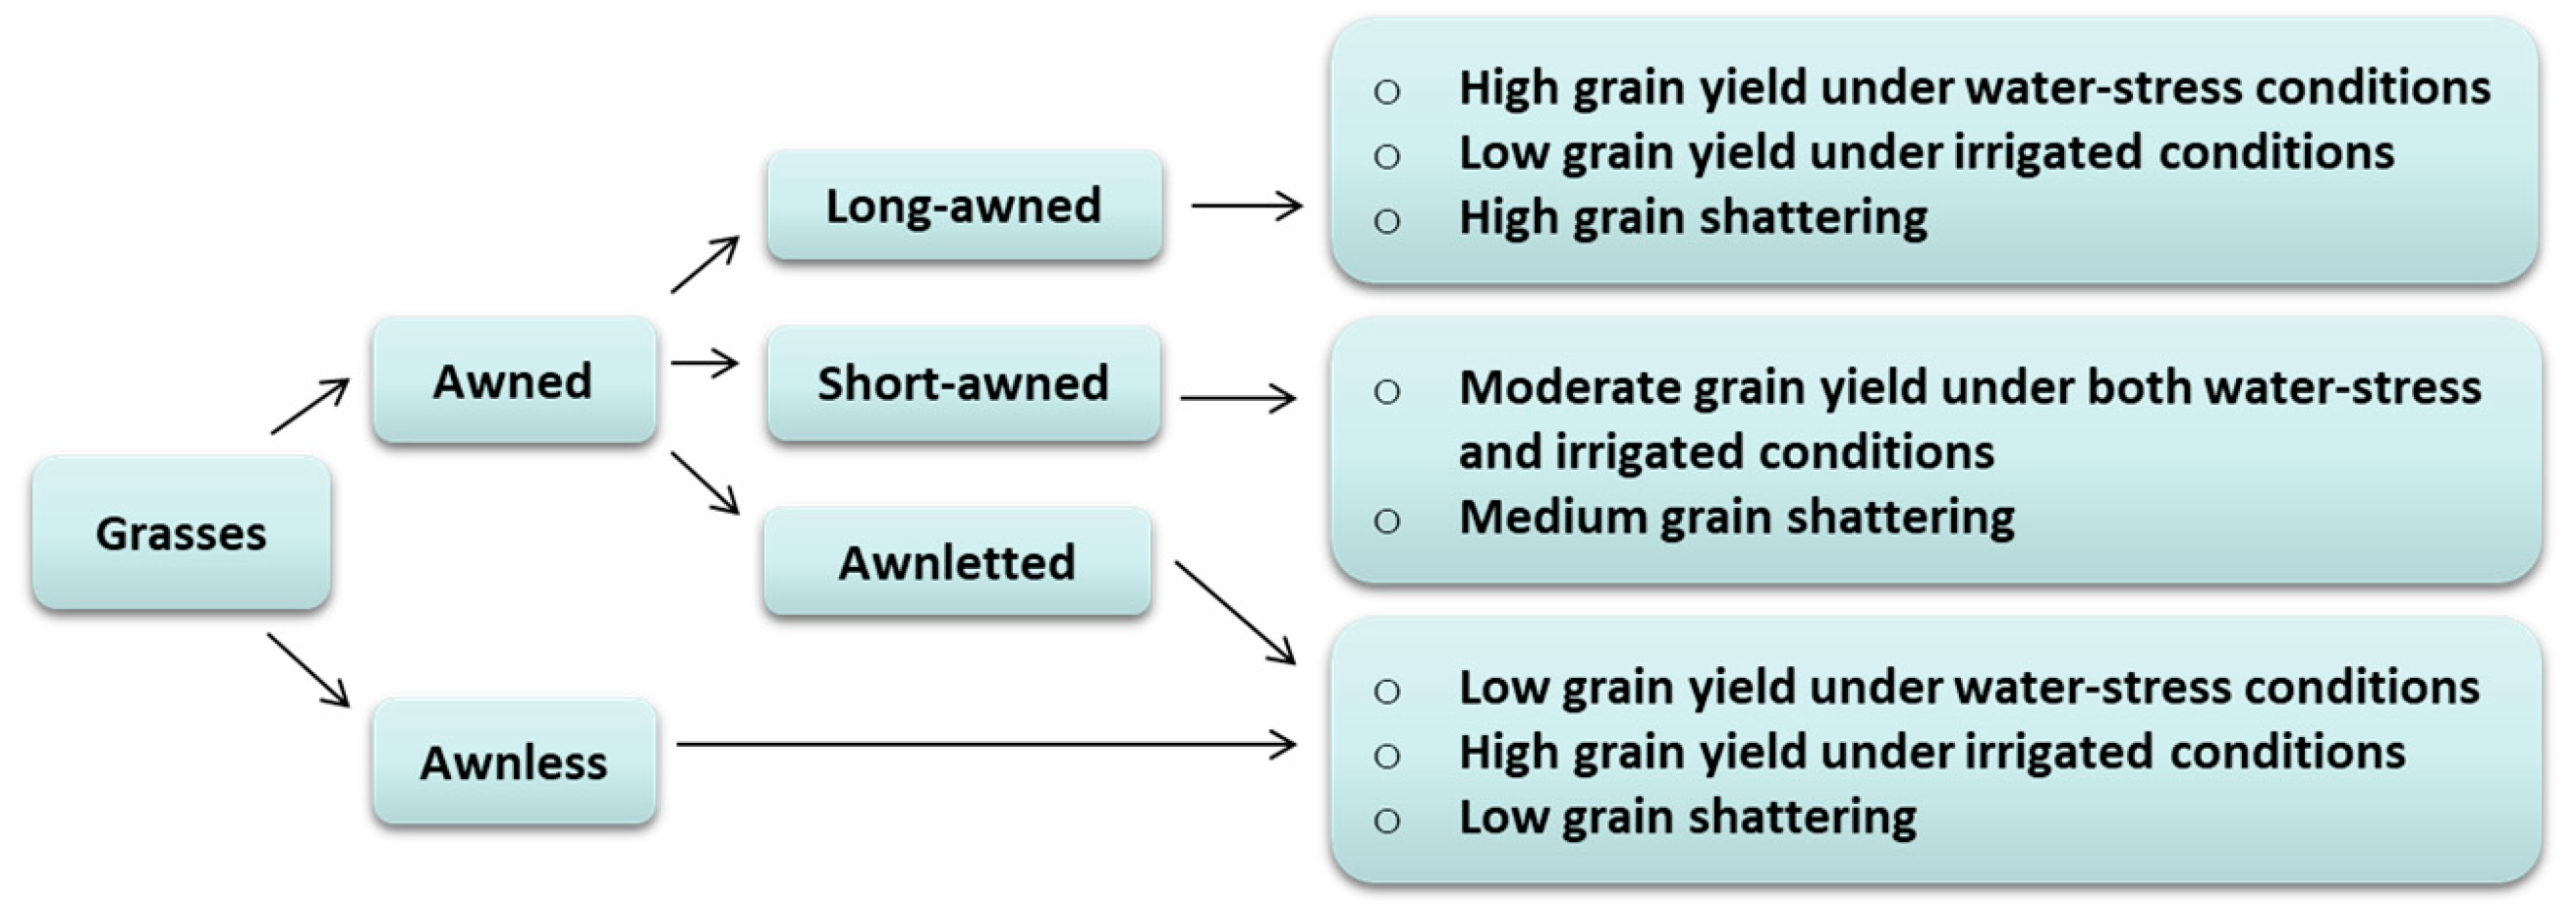 Ijms Free Full Text Unveiling The Actual Functions Of Awns In Grasses From Yield Potential To Quality Traits Html